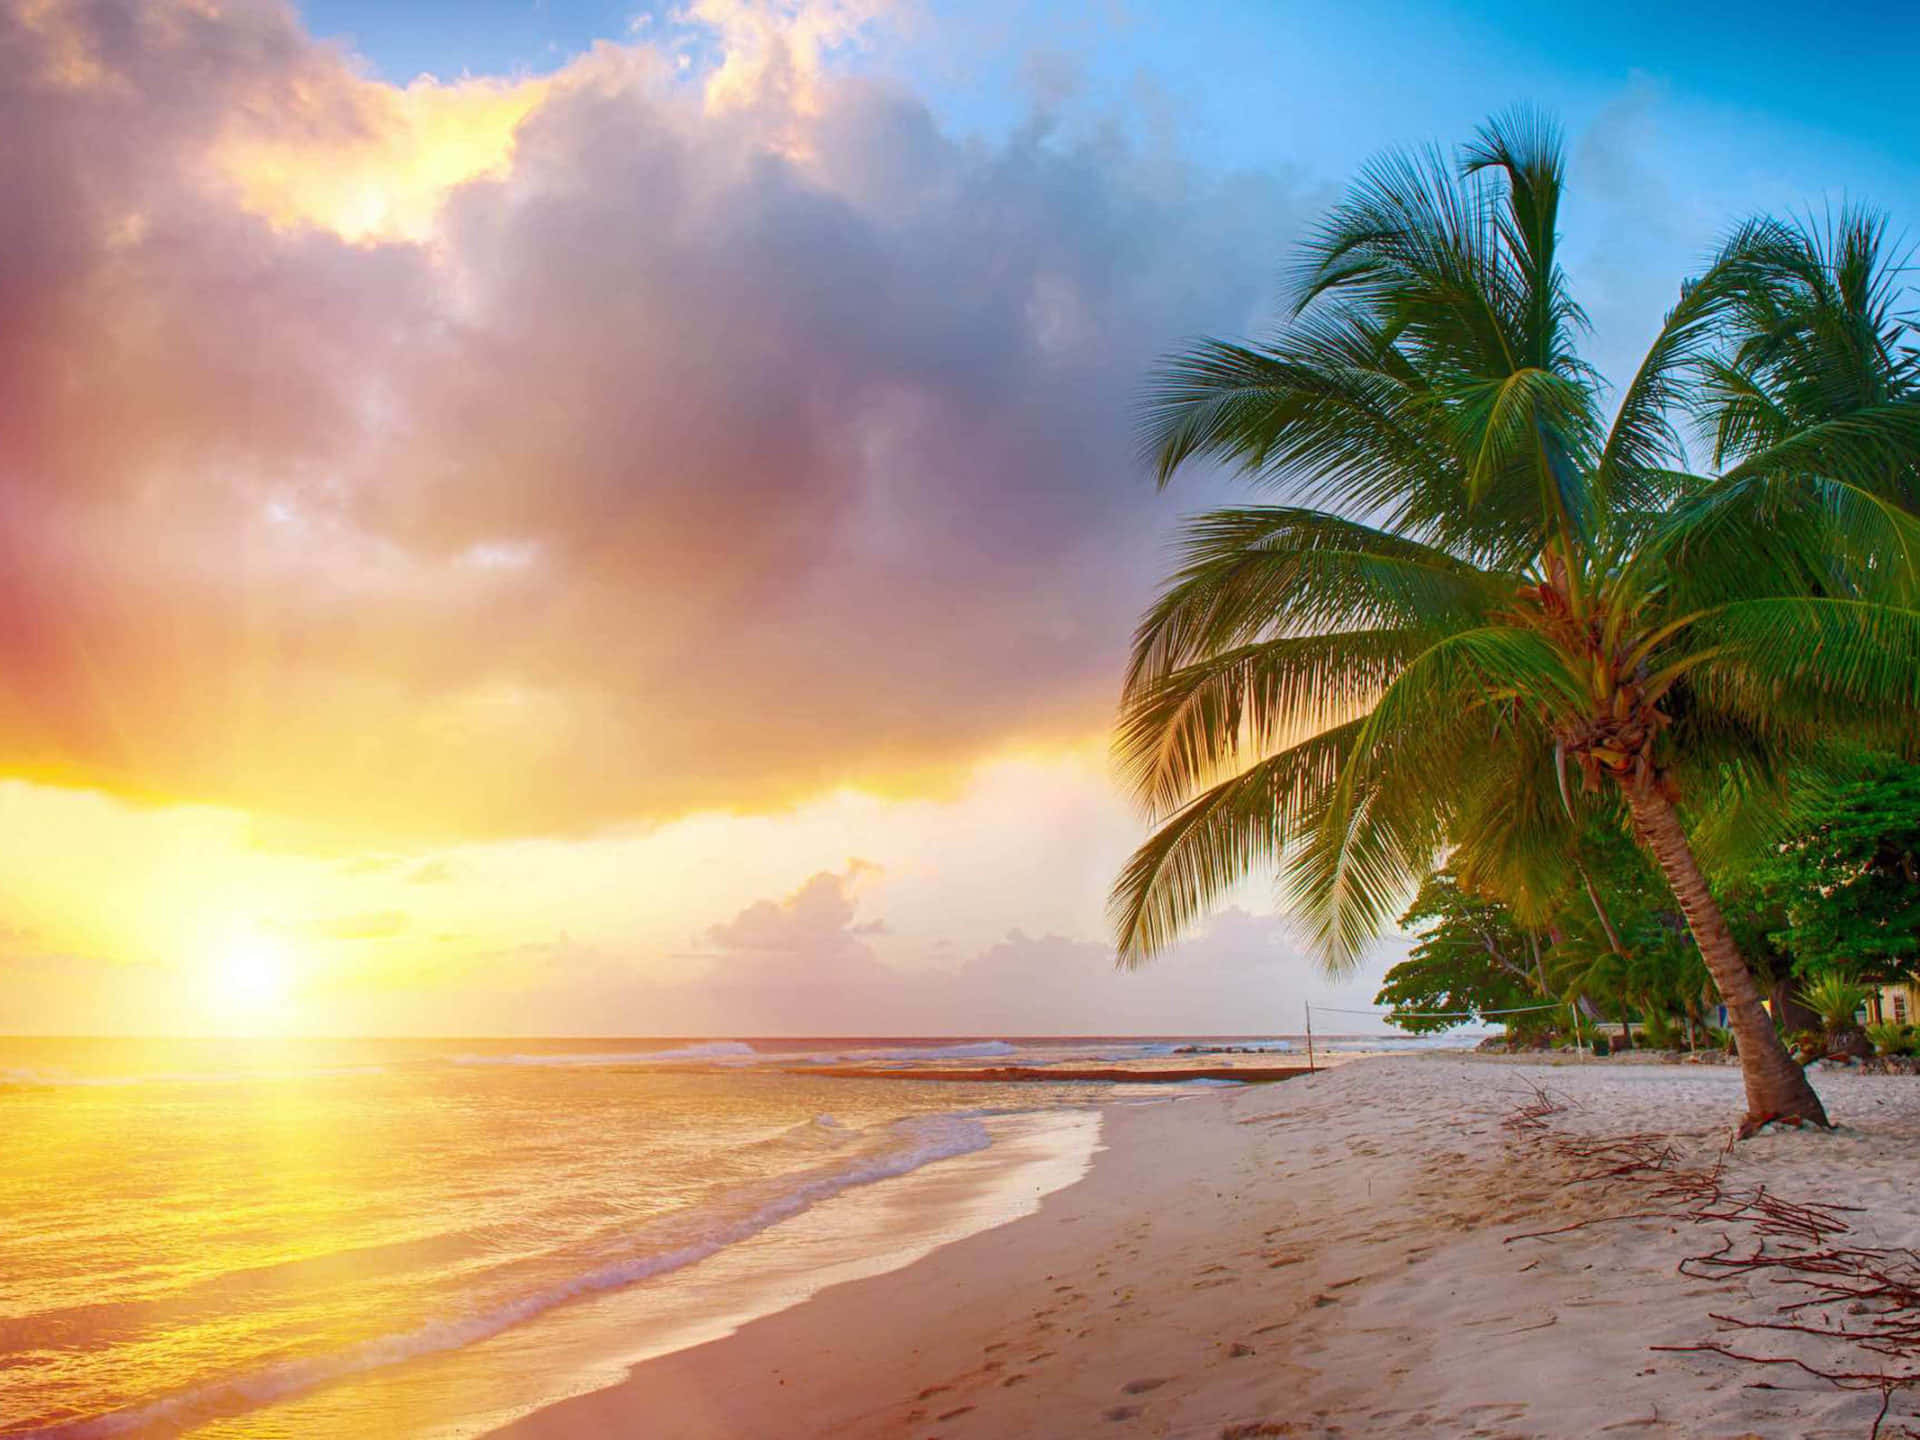 Enjoy a day of paradise with a Caribbean beach view. Wallpaper